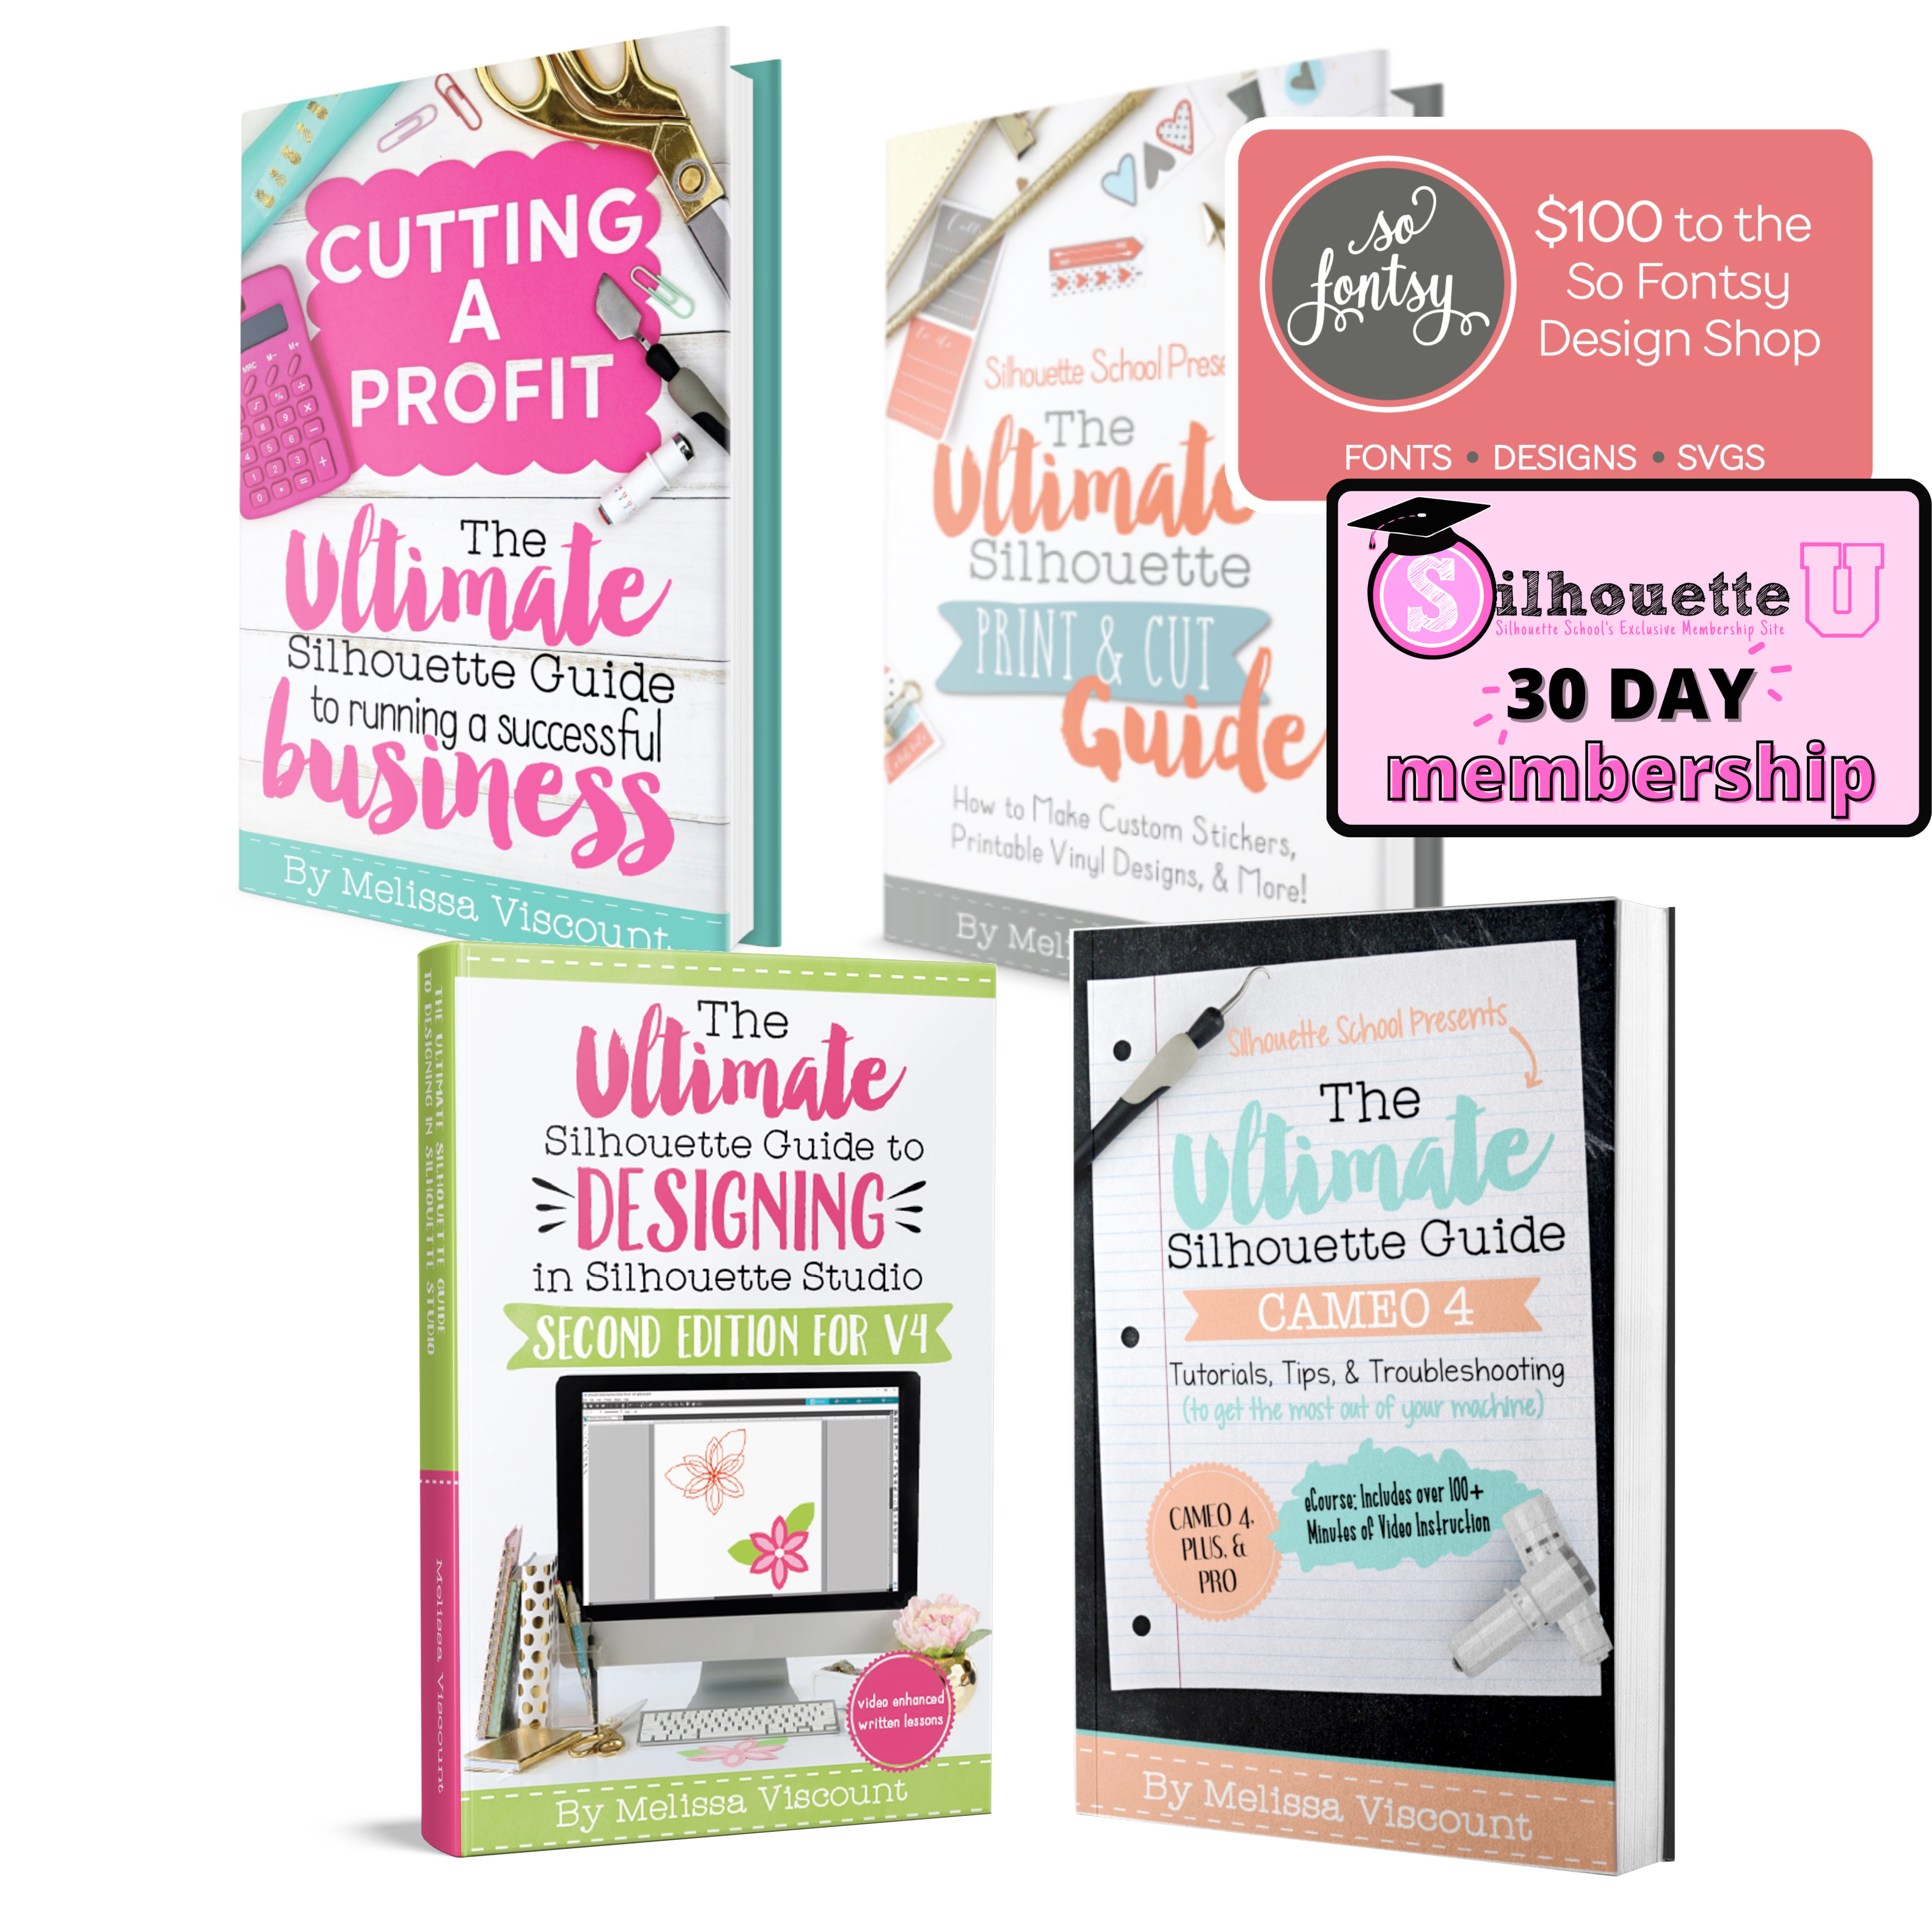 The Ultimate Silhouette E-Book by Silhouette School, 2nd Edition - V4–  Swing Design